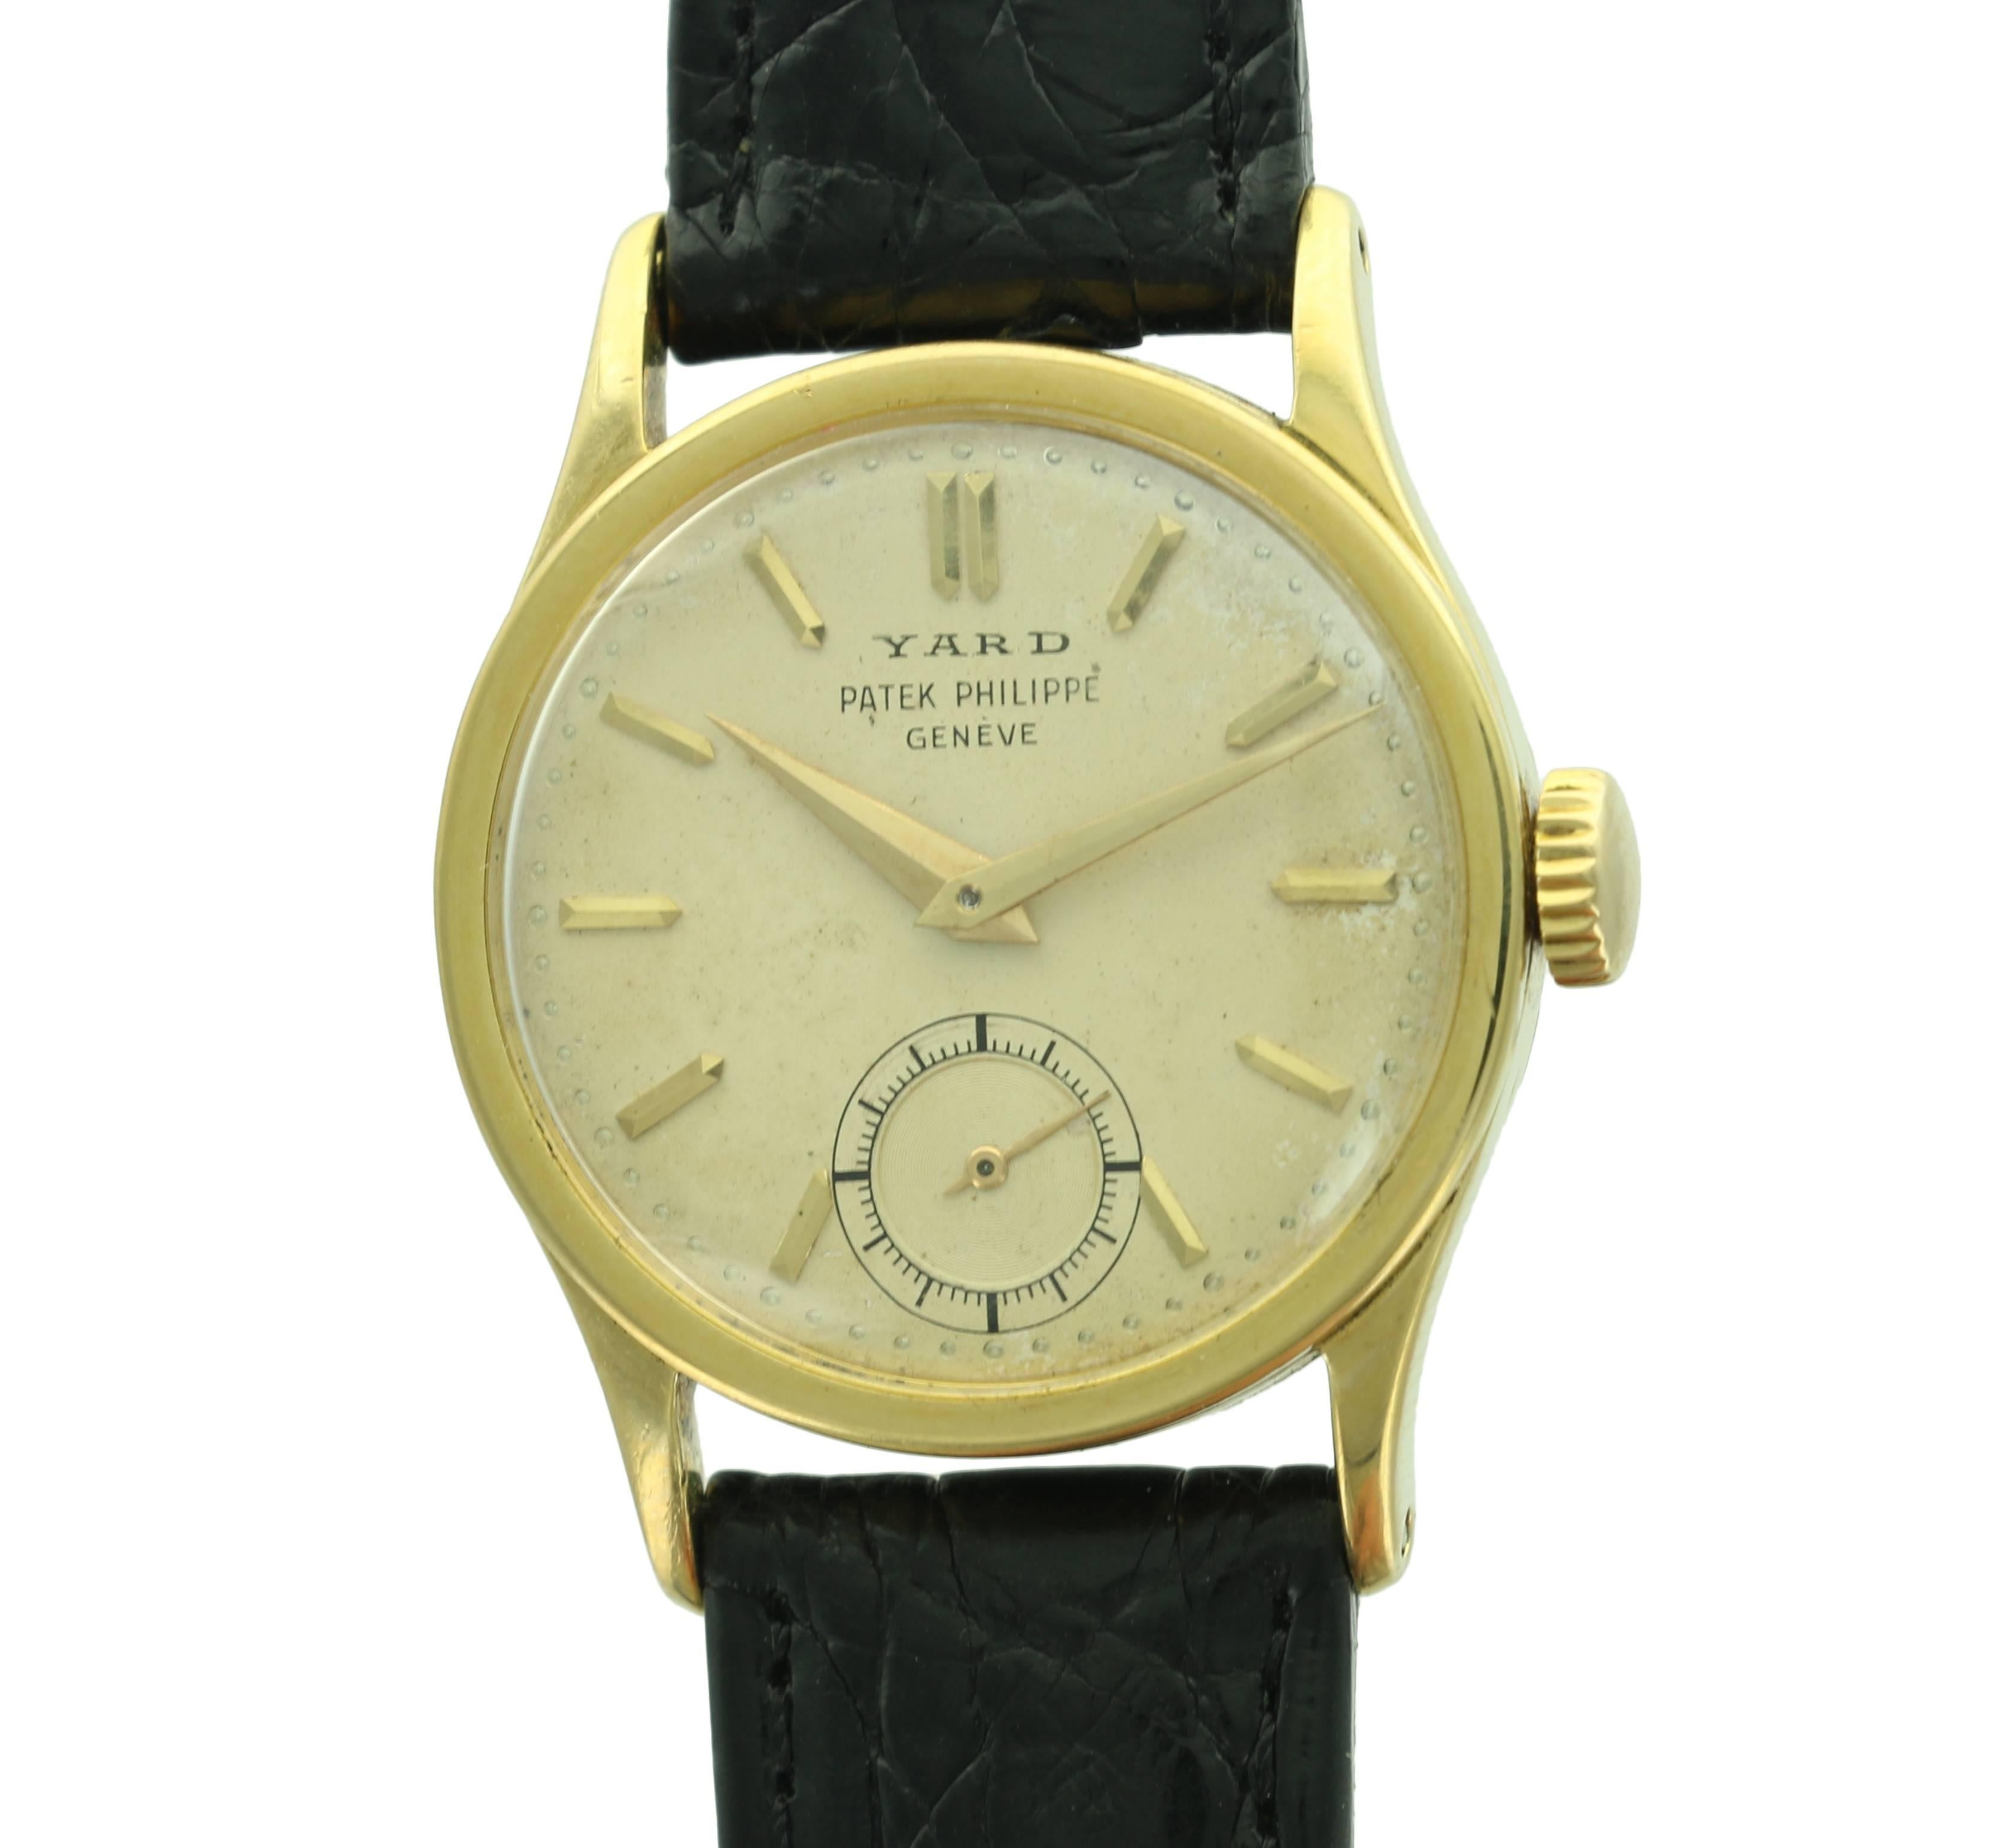 The Patek Philippe Calatrava reference 96 is a classic model with a simple and elegant design and is bit smaller than many of the other Calatrava models. This particular 96J is in excellent condition and was originally sold by Yard and is stamped